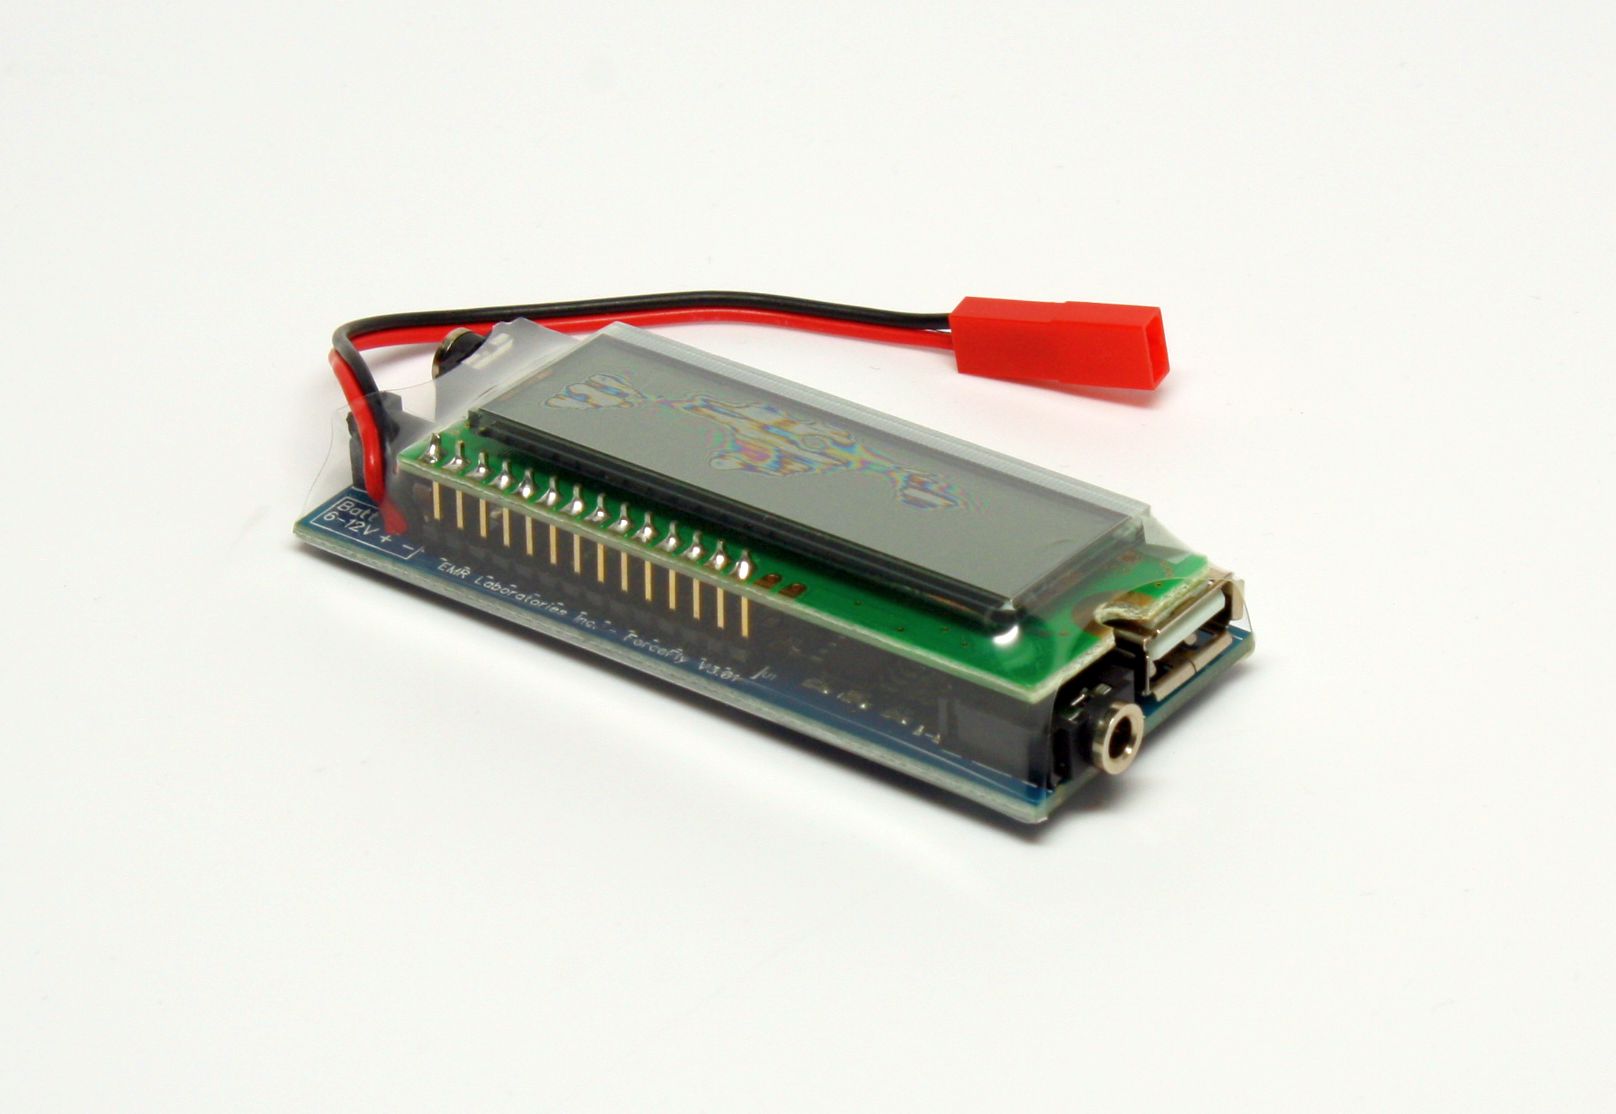 ForceFly Computer. The Programmable USB Joystick Interface for Radio Control Applications